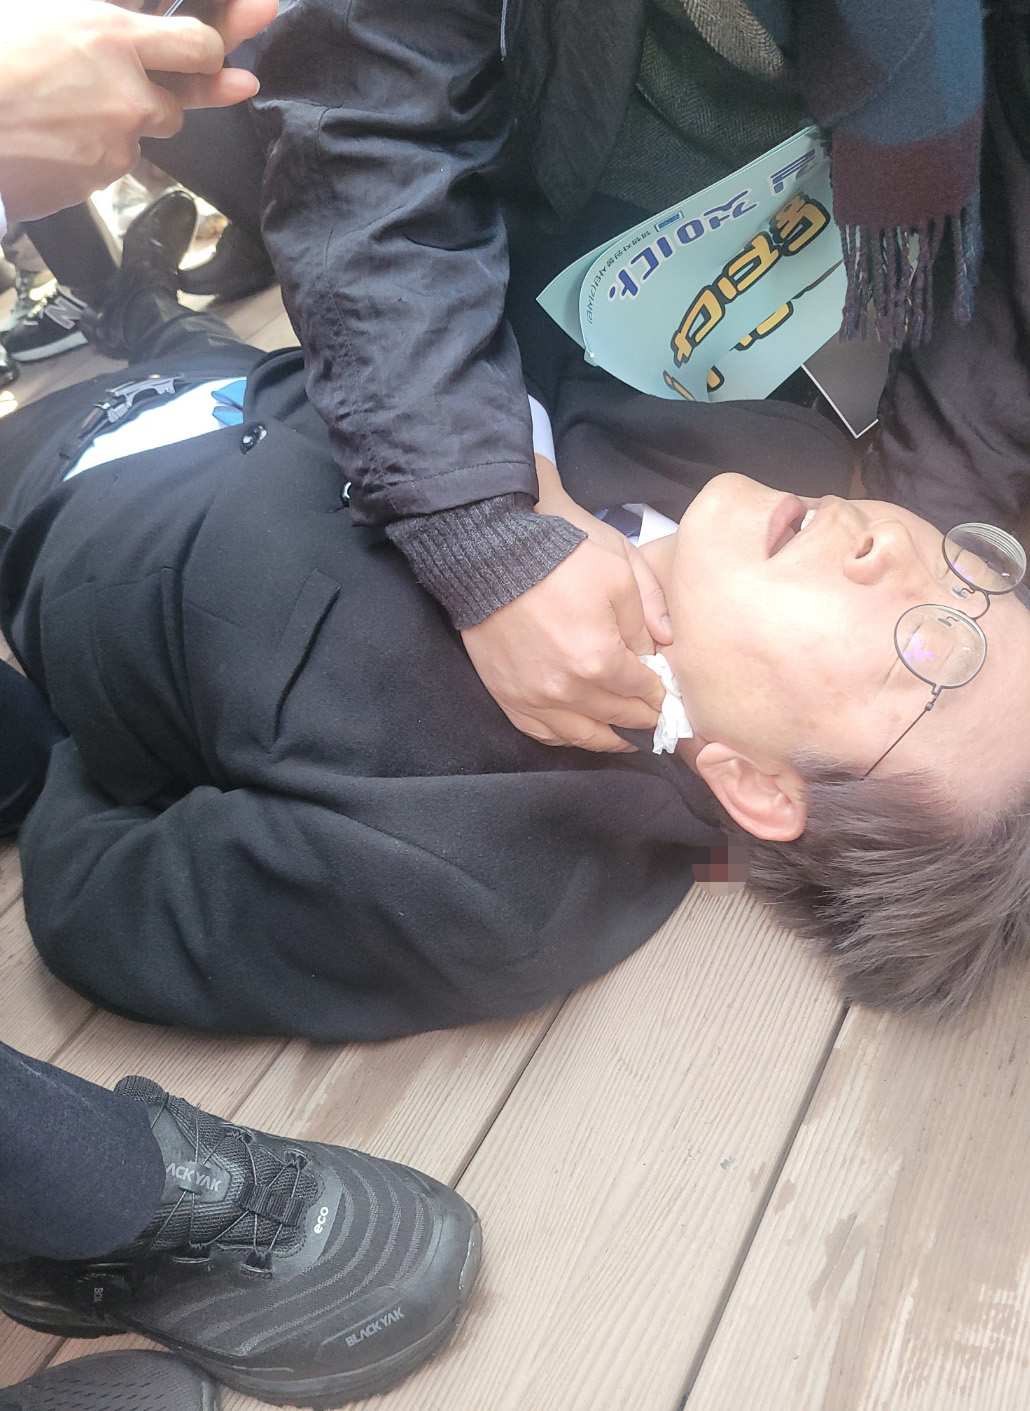 Lee Jae-myung, the leader of the main opposition Democratic Party, lies on the floor after he was attacked Tuesday by an unidentified individual during his visit to Busan. (Yonhap)